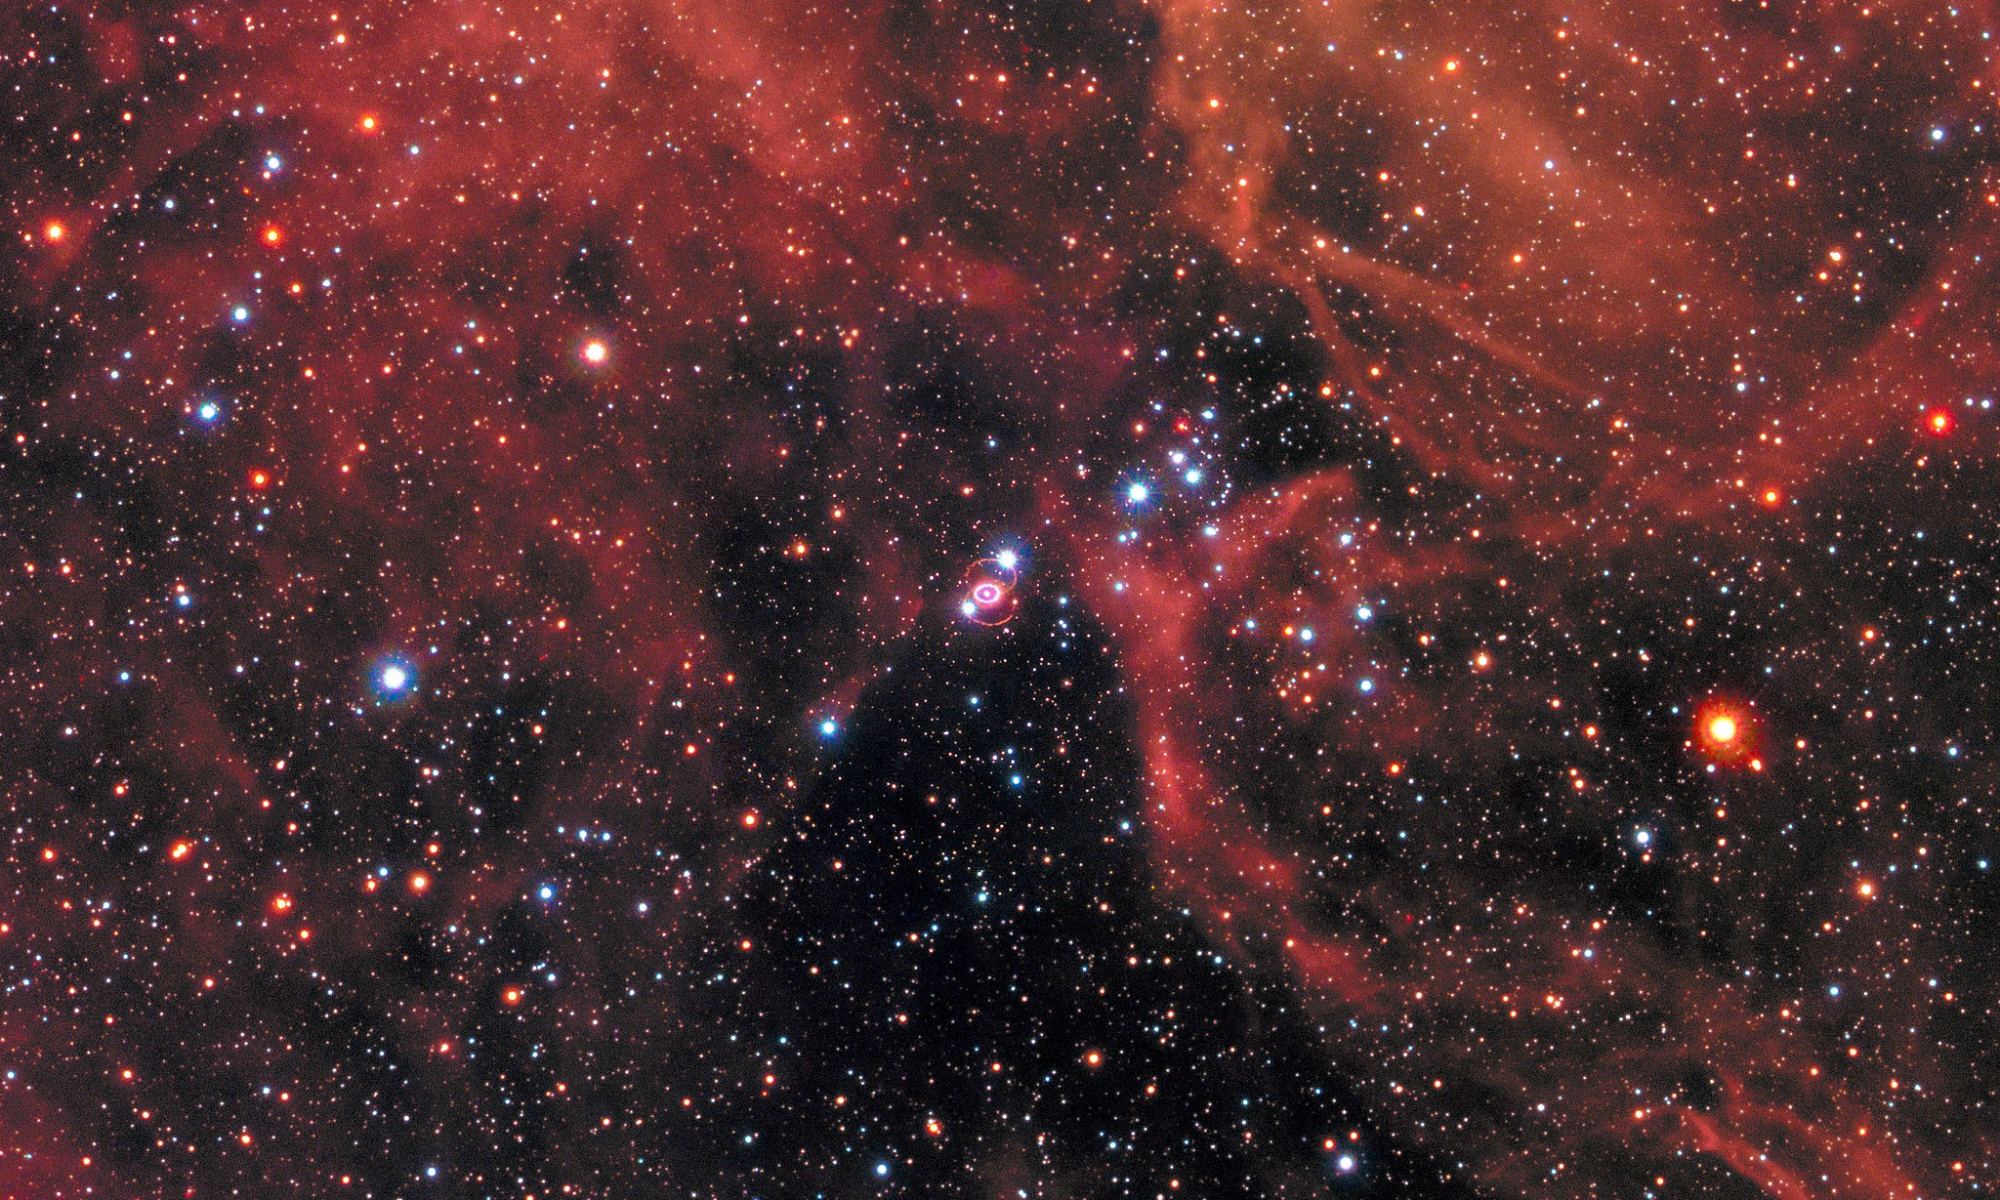 This image of the supernova remnant SN 1987A was taken by the NASA/ESA Hubble Space Telescope in January 2017 using its Wide Field Camera 3 (WFC3). Since its launch in 1990 Hubble has observed the expanding dust cloud of SN 1987A several times has helped astronomers get a better understanding of these cosmic explosions. Supernova 1987A is located in the centre of the image amidst a backdrop of stars. The bright ring around the central region of the exploded star is material ejected by the star about 20 000 years before the actual explosion took place. The supernova is surrounded by gaseous clouds. The clouds’ red colour represents the glow of hydrogen gas. Image Credit: NASA, ESA, and R. Kirshner (Harvard-Smithsonian Center for Astrophysics and Gordon and Betty Moore Foundation) and P. Challis (Harvard-Smithsonian Center for Astrophysics)